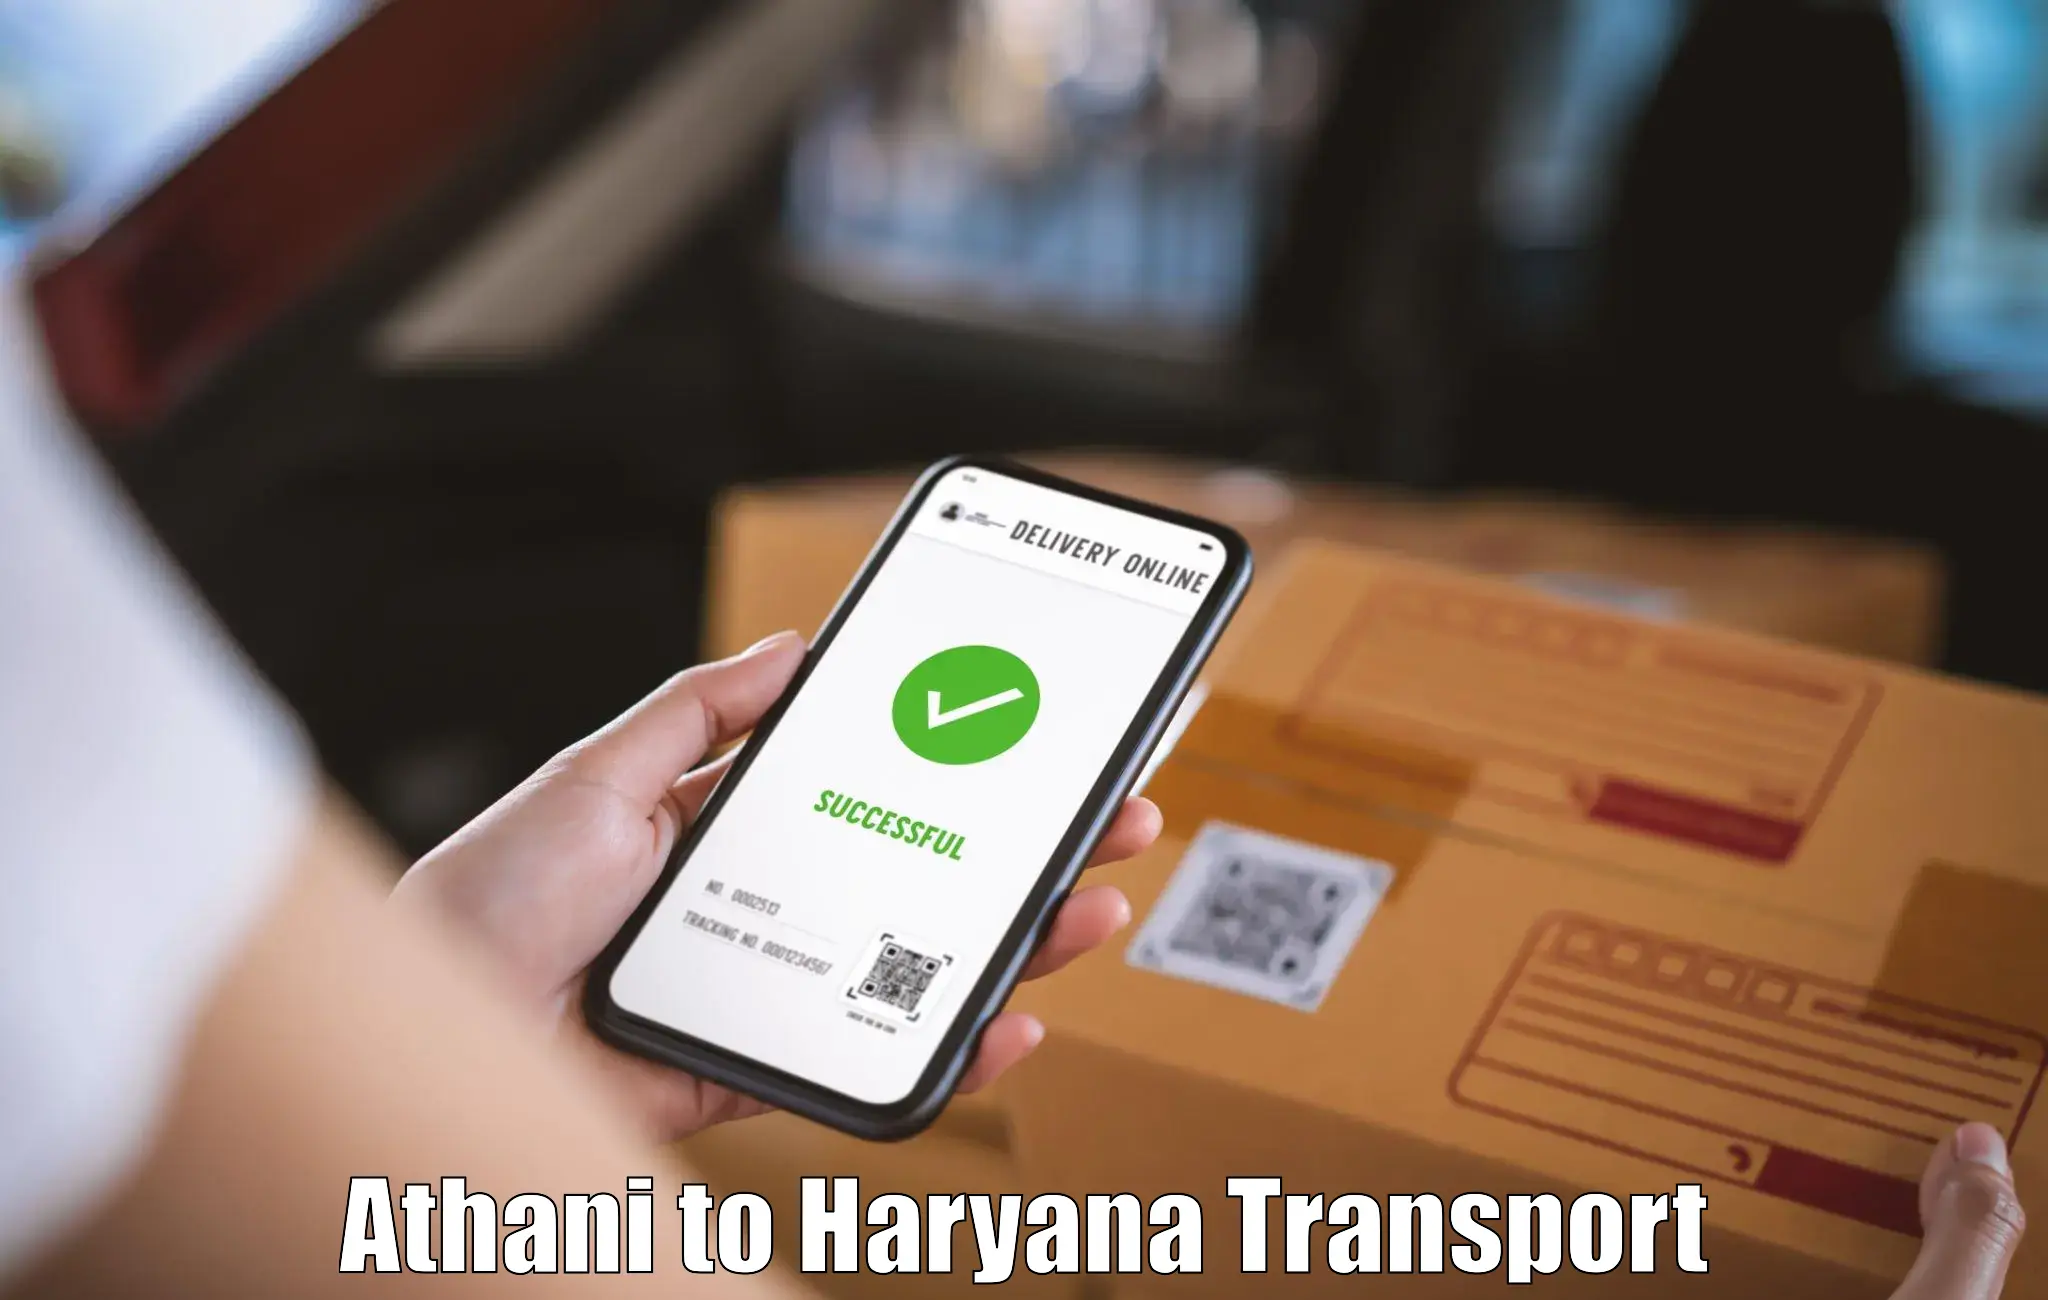 Transport shared services Athani to Odhan